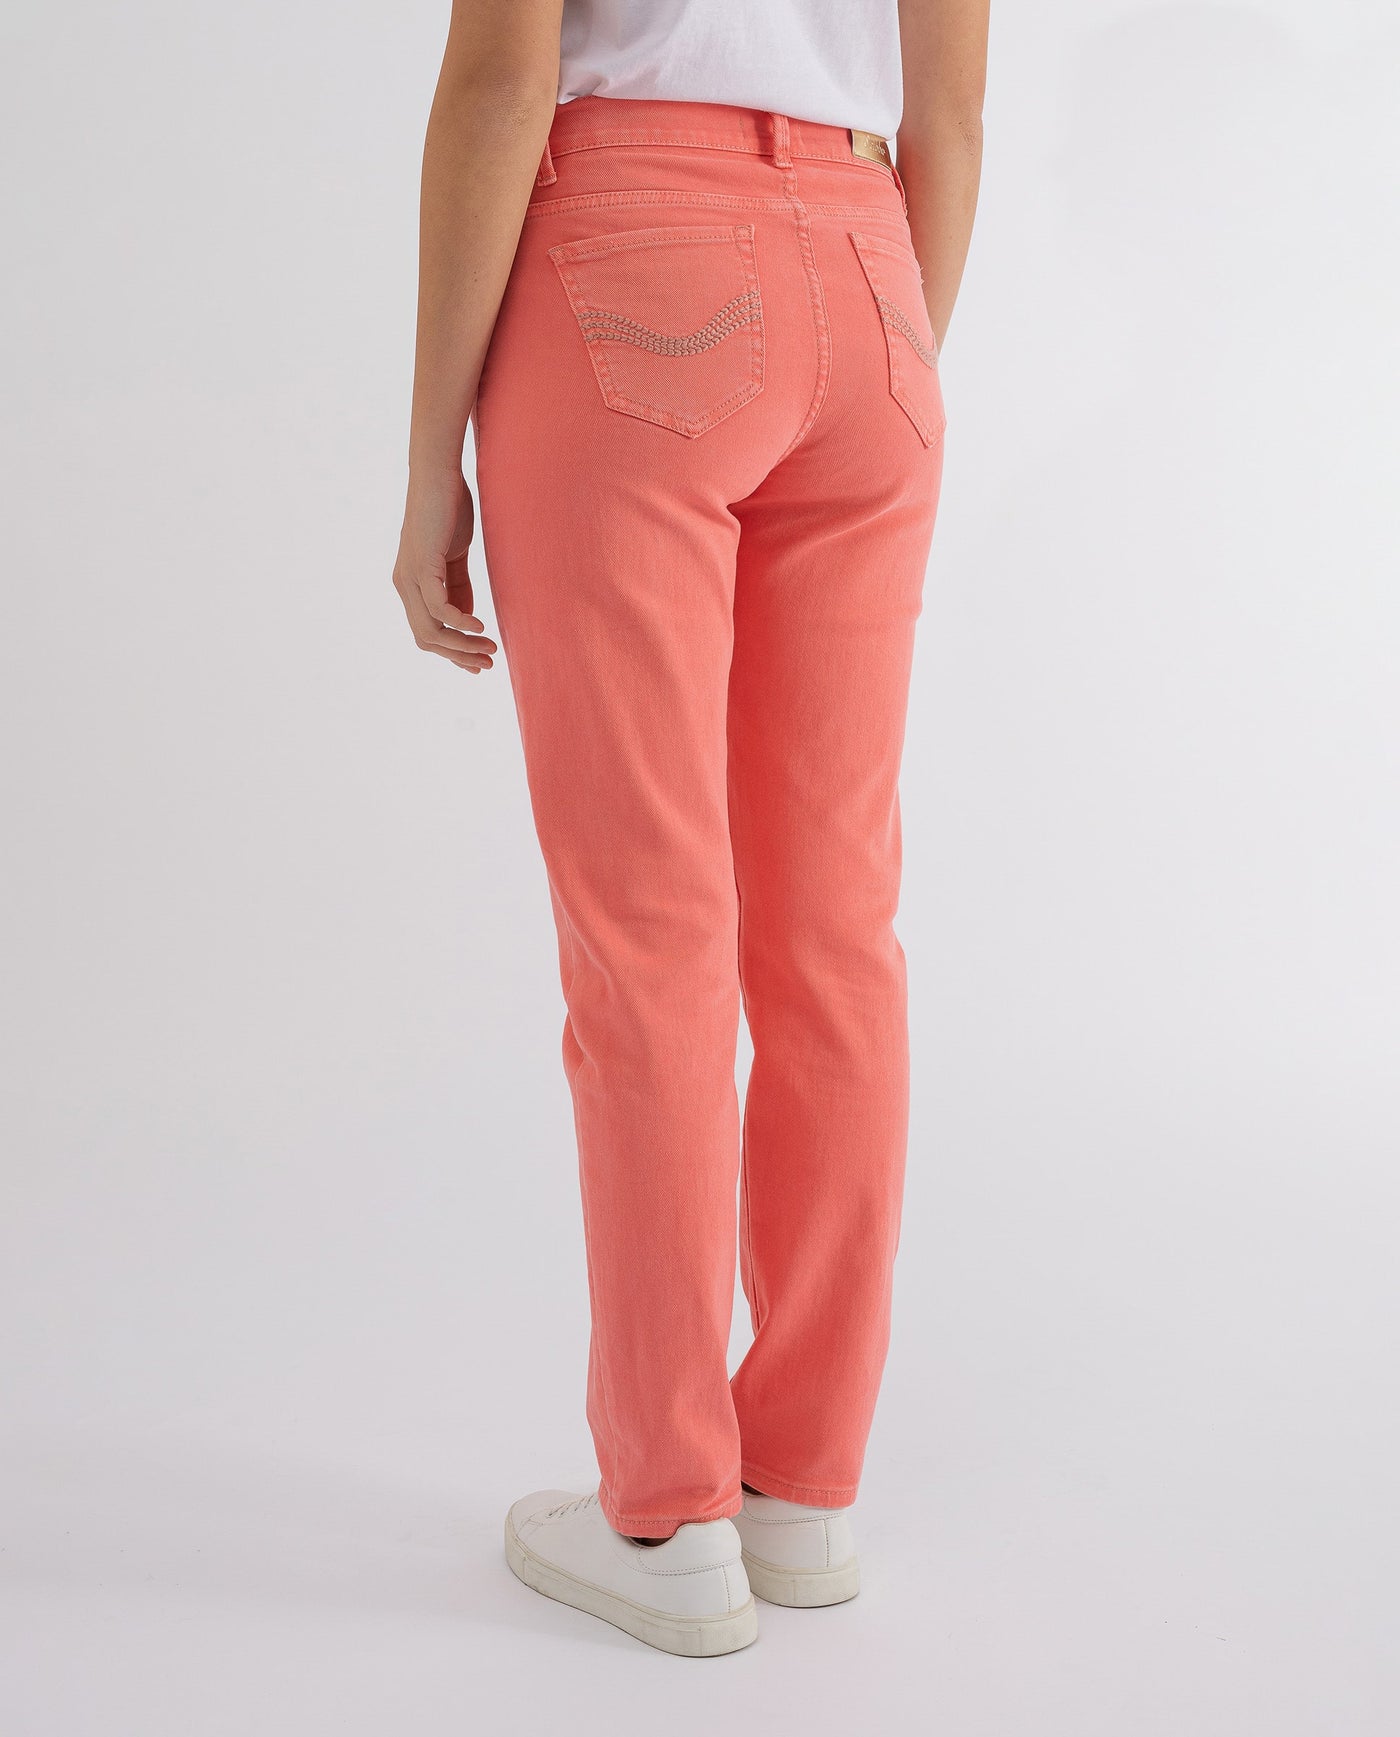 PANTS WITH 5 POCKETS CORAL GARMENT DYE